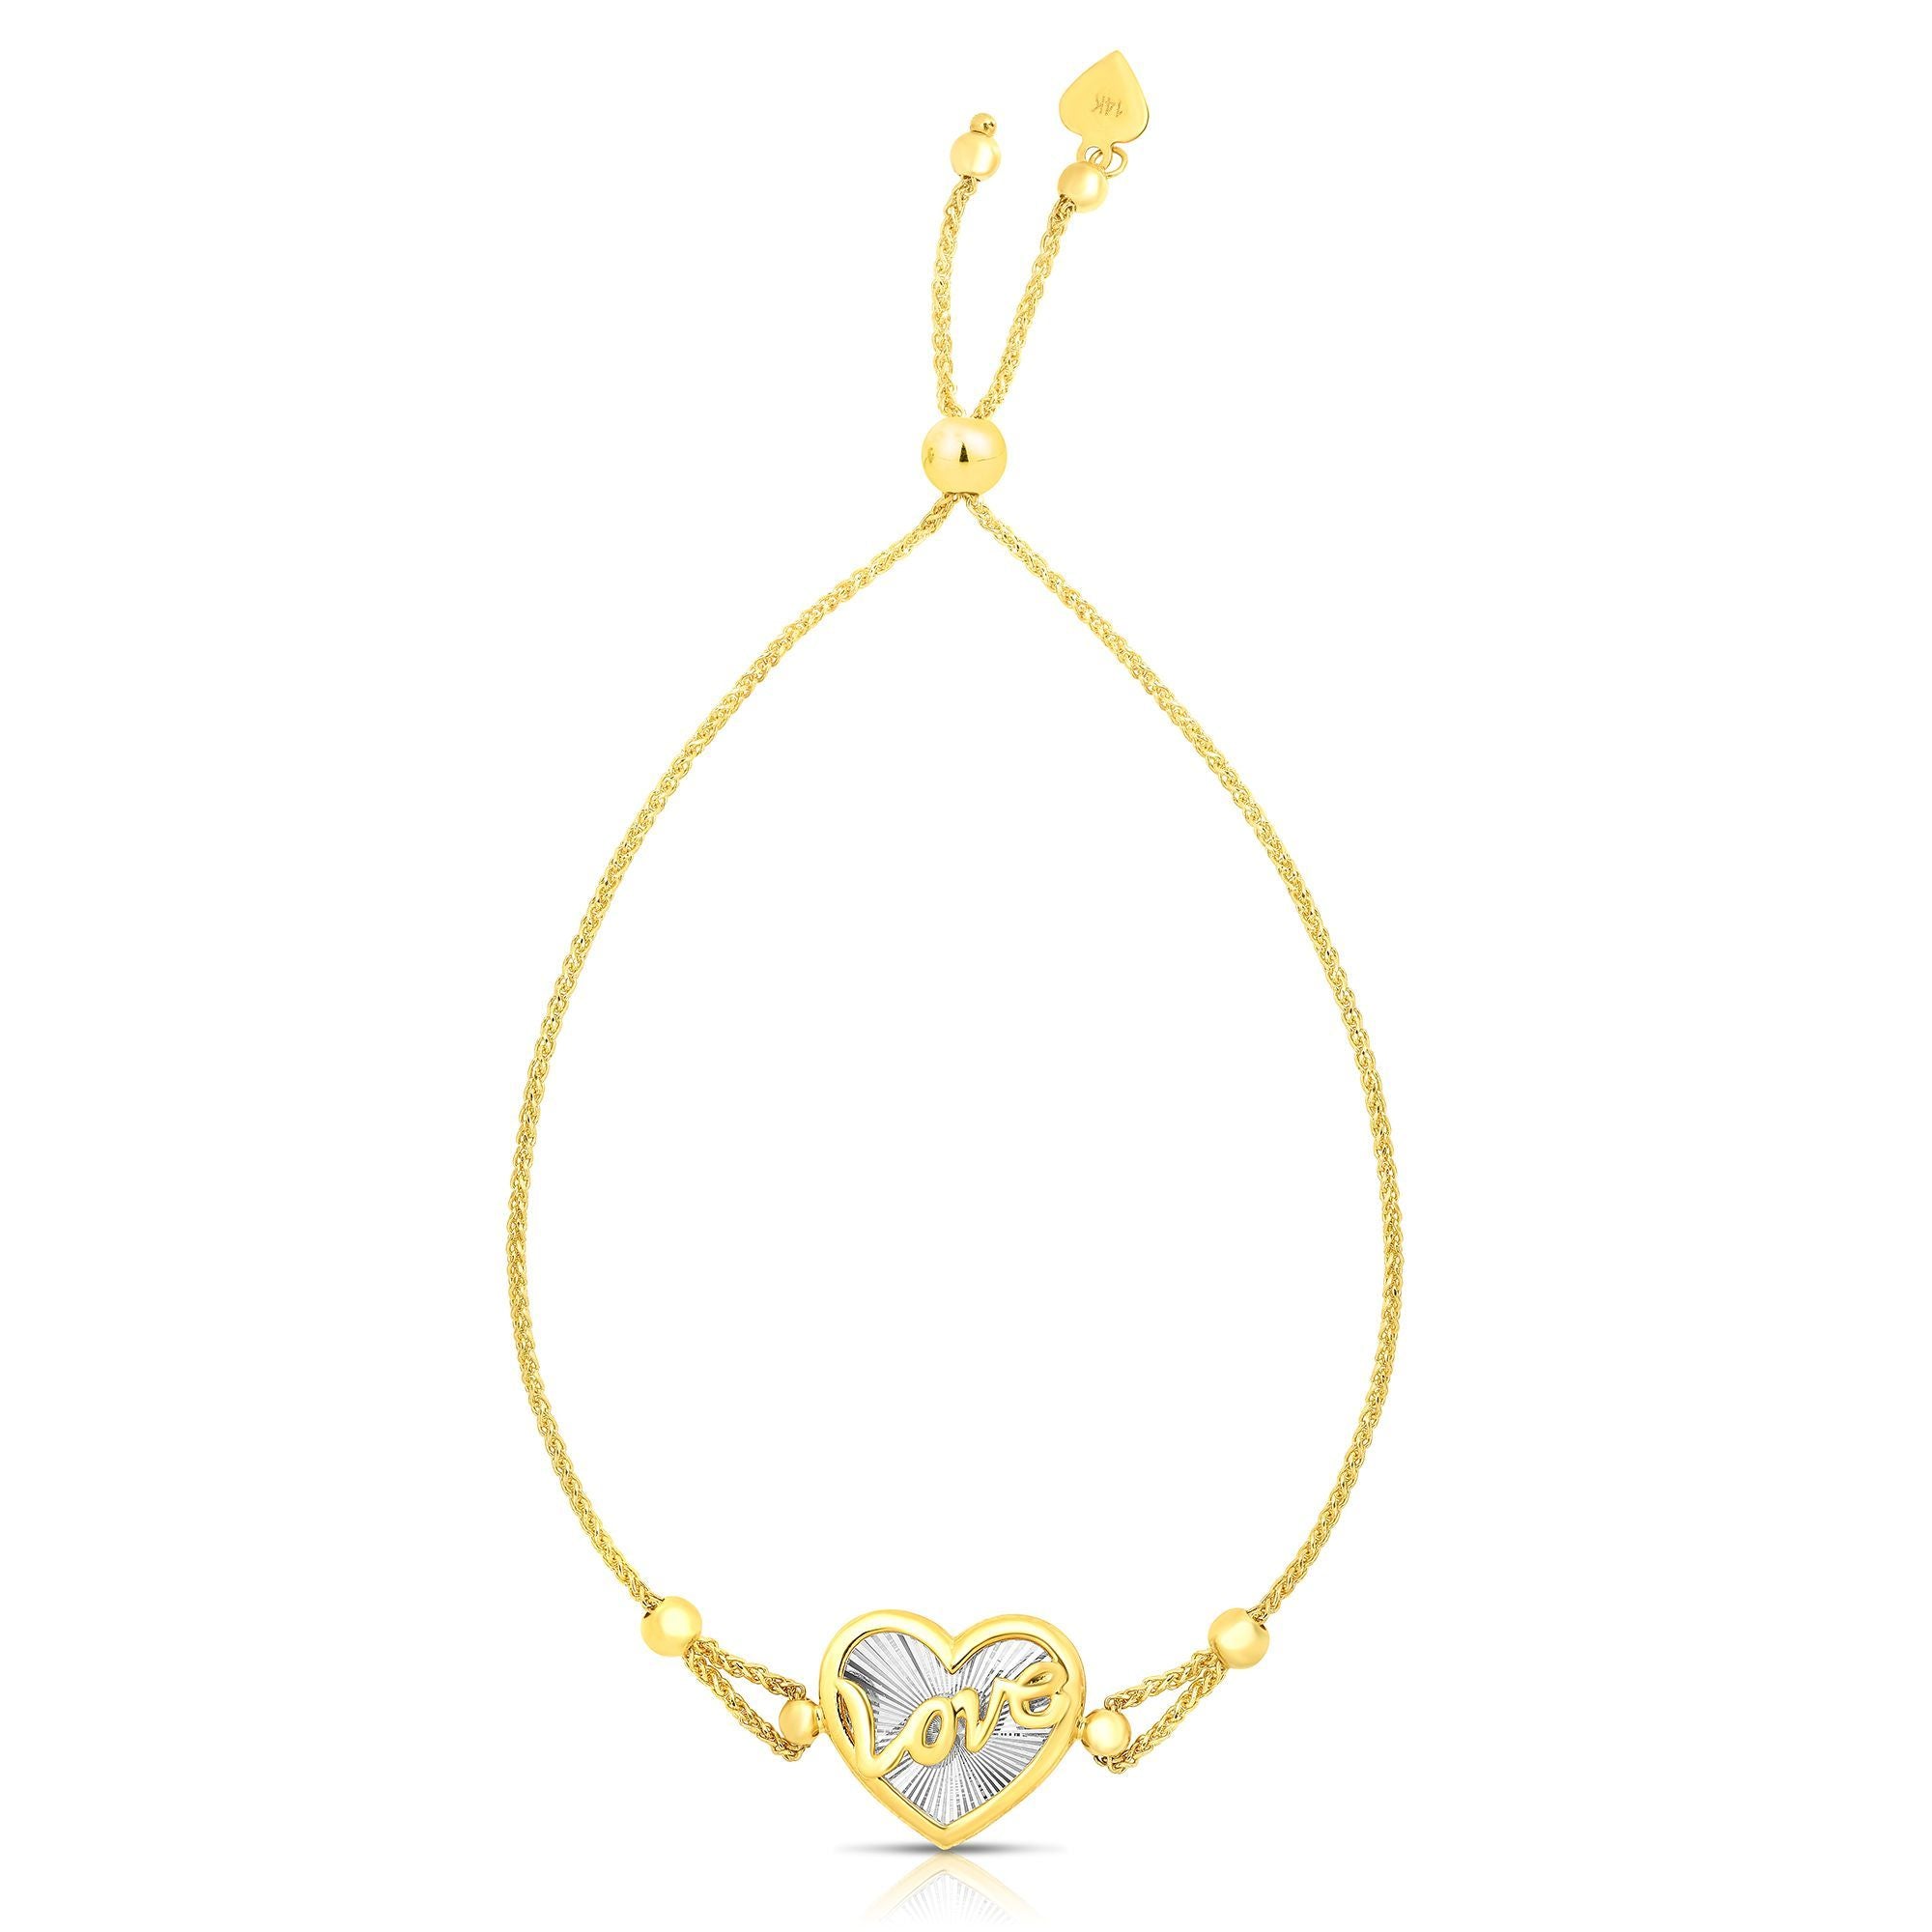 14k Yellow And White Gold Heart Love Charm Adjustable Bracelet, 9.25" fine designer jewelry for men and women